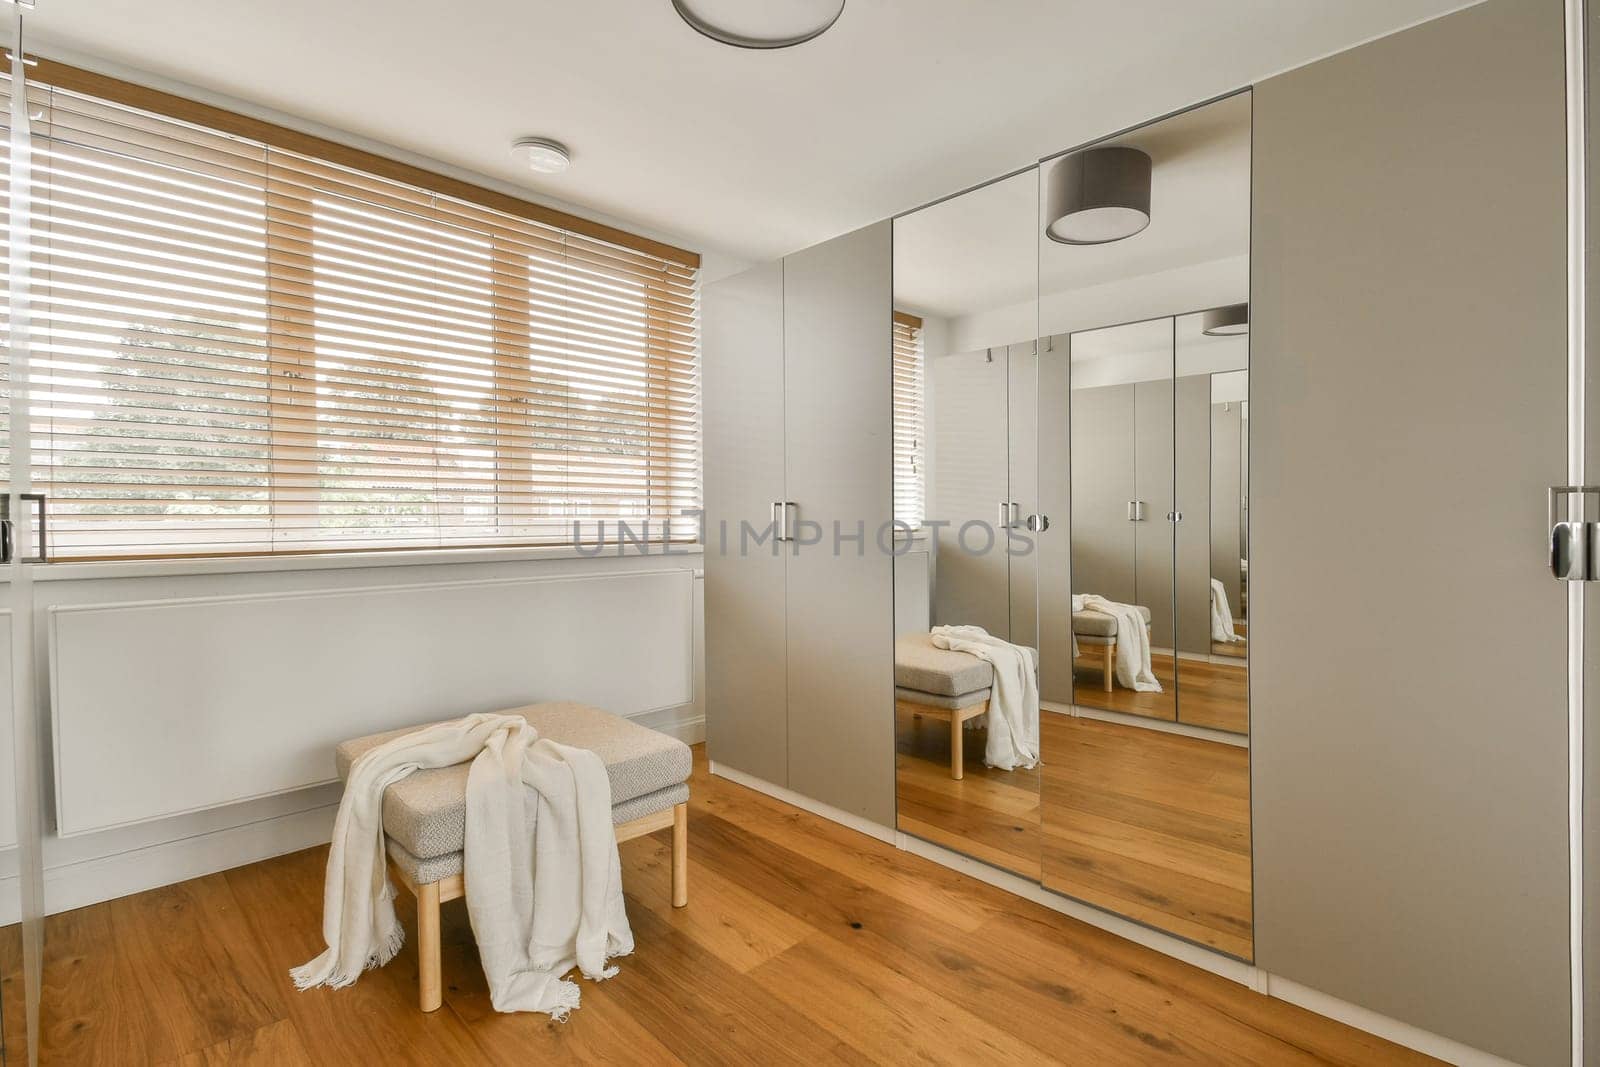 a modern bathroom with wood flooring and large mirrors on the wall, along with a white bathrobear